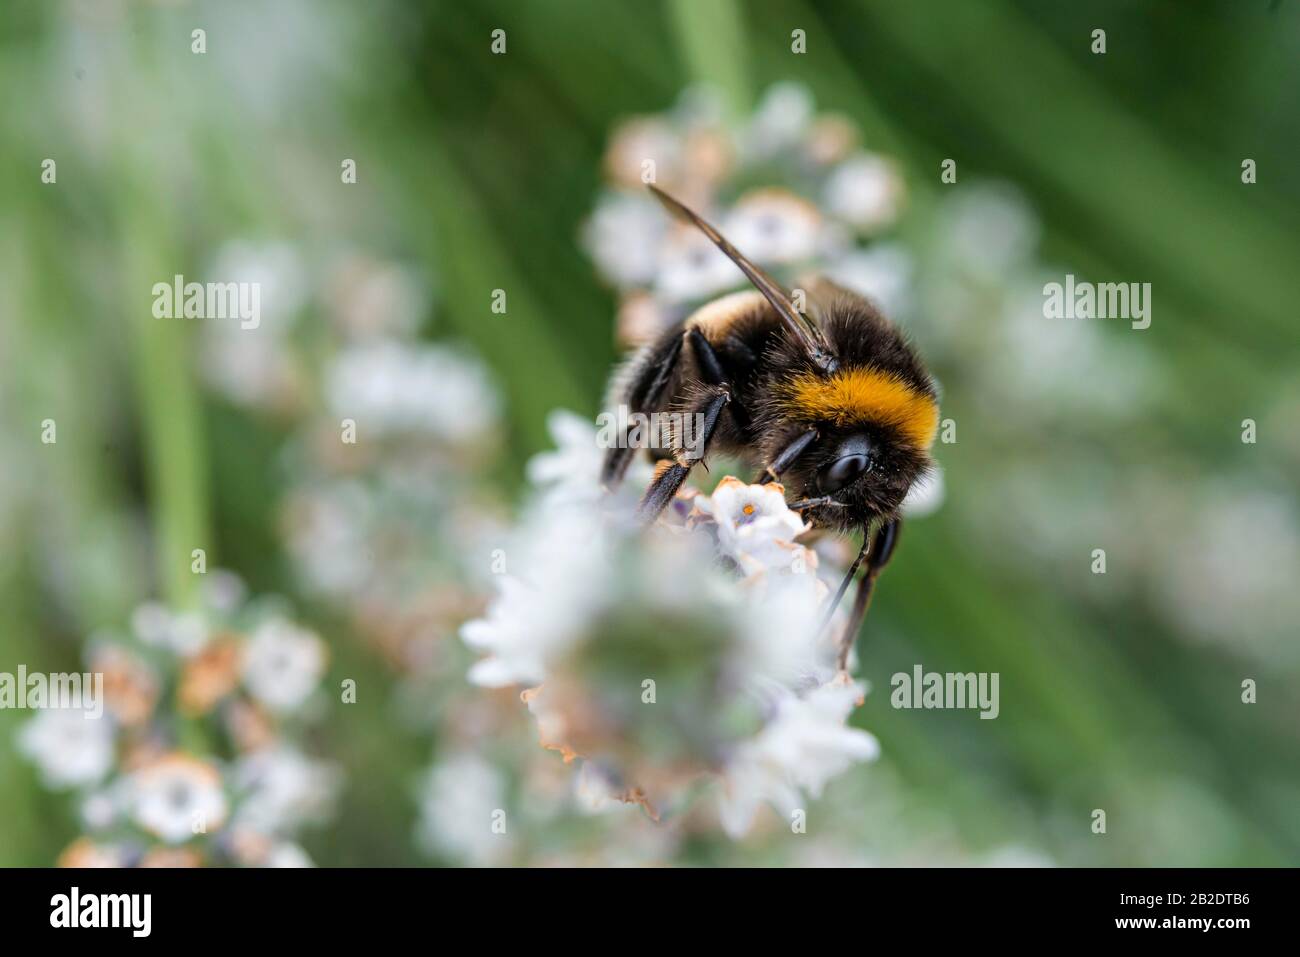 Bumblebee (Bombus) collects nectar on a white flower, close-up, Germany Stock Photo